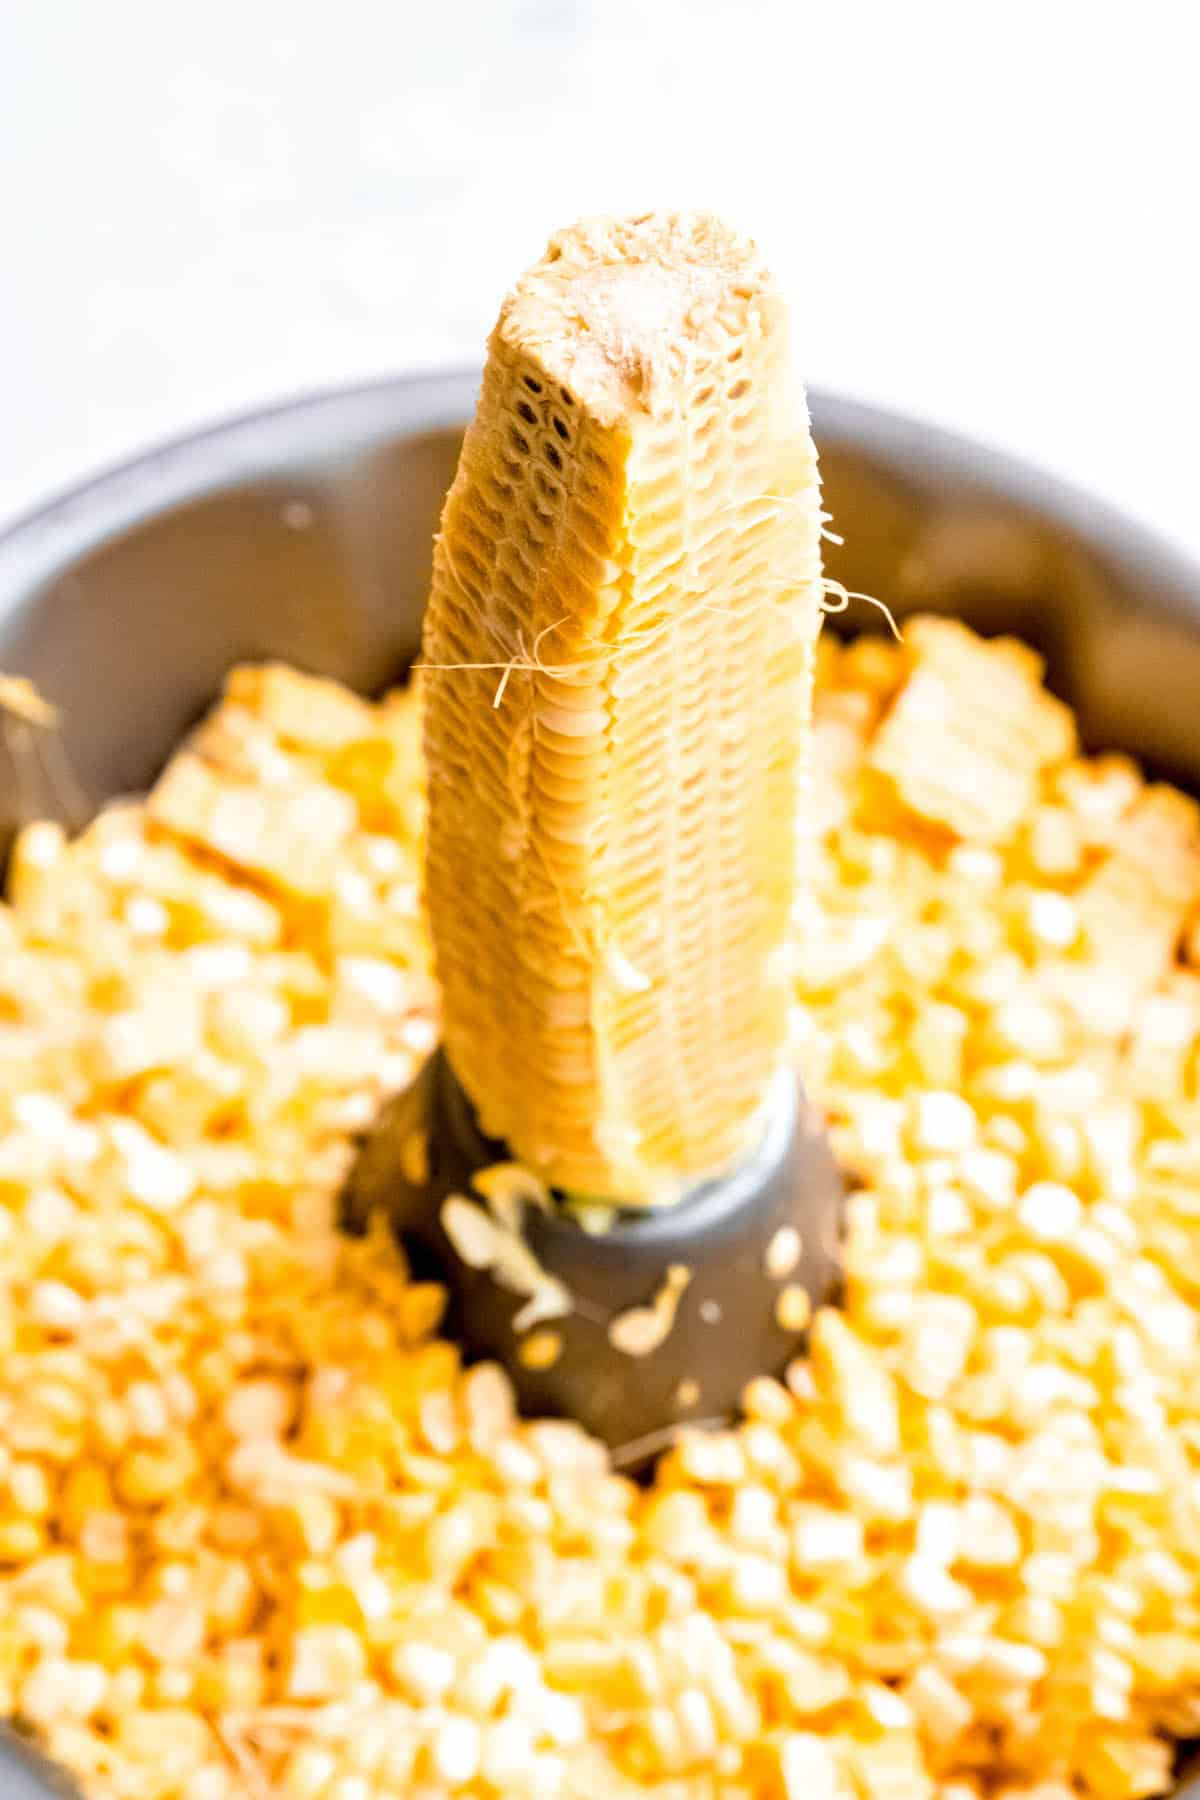 naked ear of corn standing upright in the center of a bundt pan with corn kernels in the cake tin, demonstrating a hack for removing the corn without it flying everywhere.